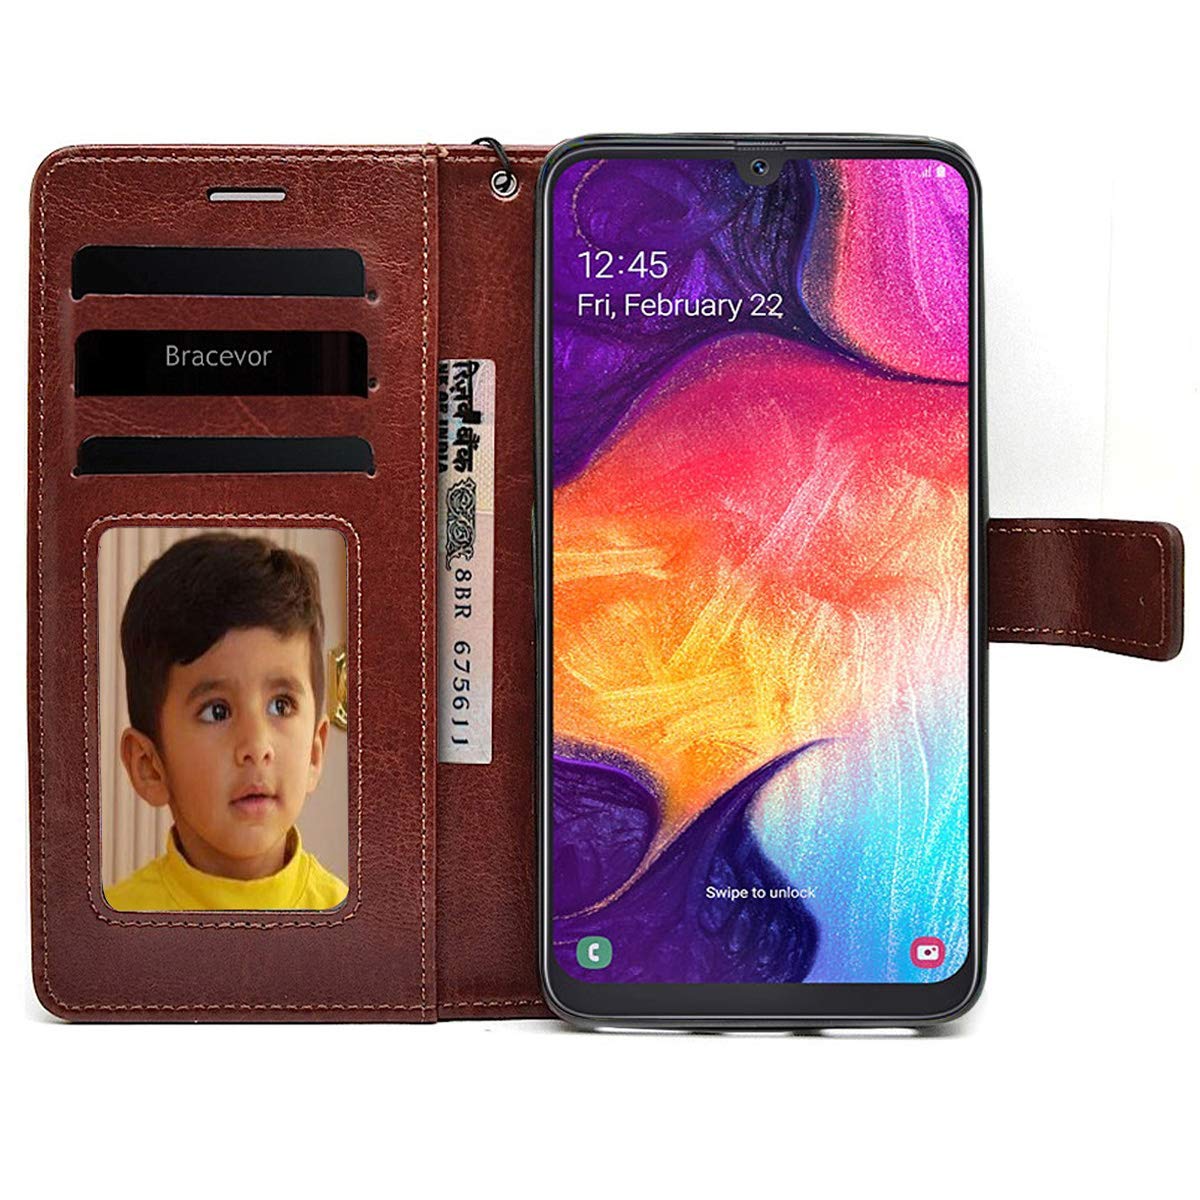 Bracevor Samsung Galaxy A50 | A30s | A50s Flip Cover Case | Premium Leather | Inner TPU | Foldable Stand | Wallet Card Slots - Executive Brown